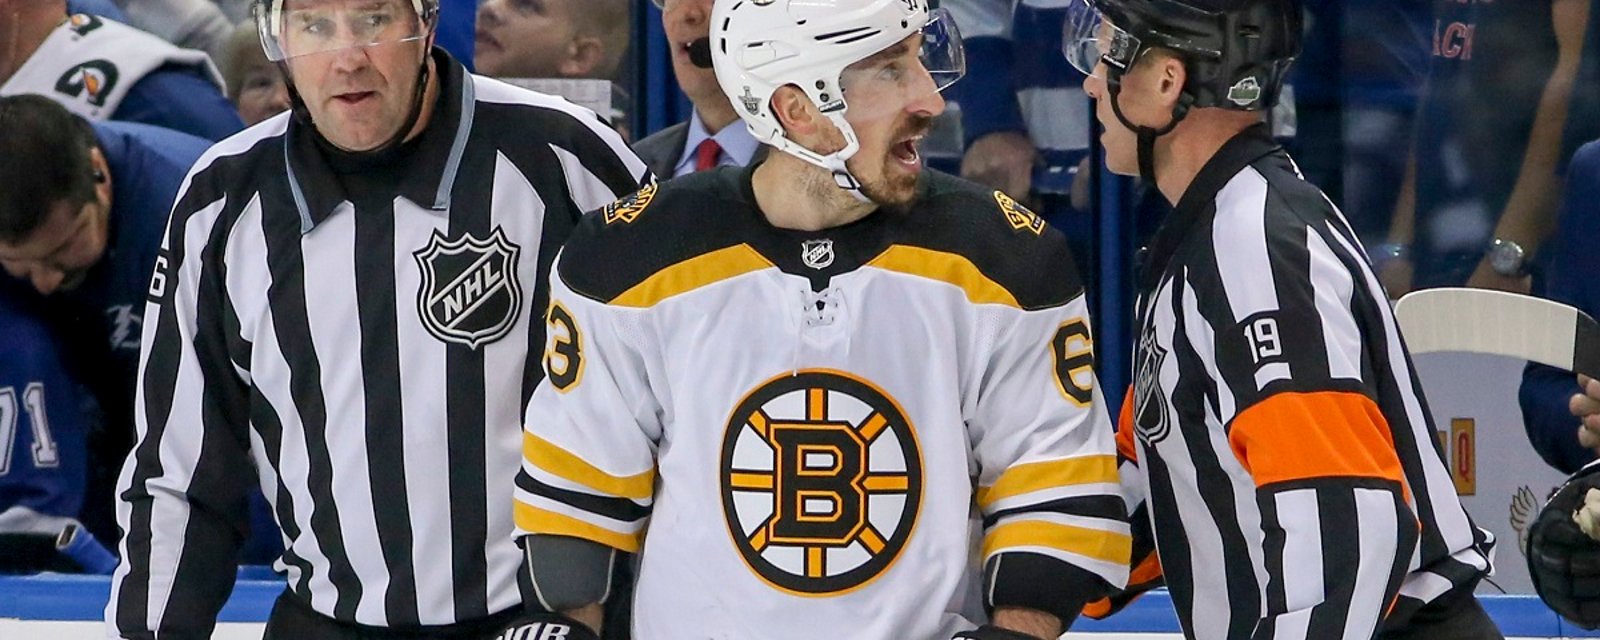 Brad Marchand snaps at the officials on Saturday afternoon.